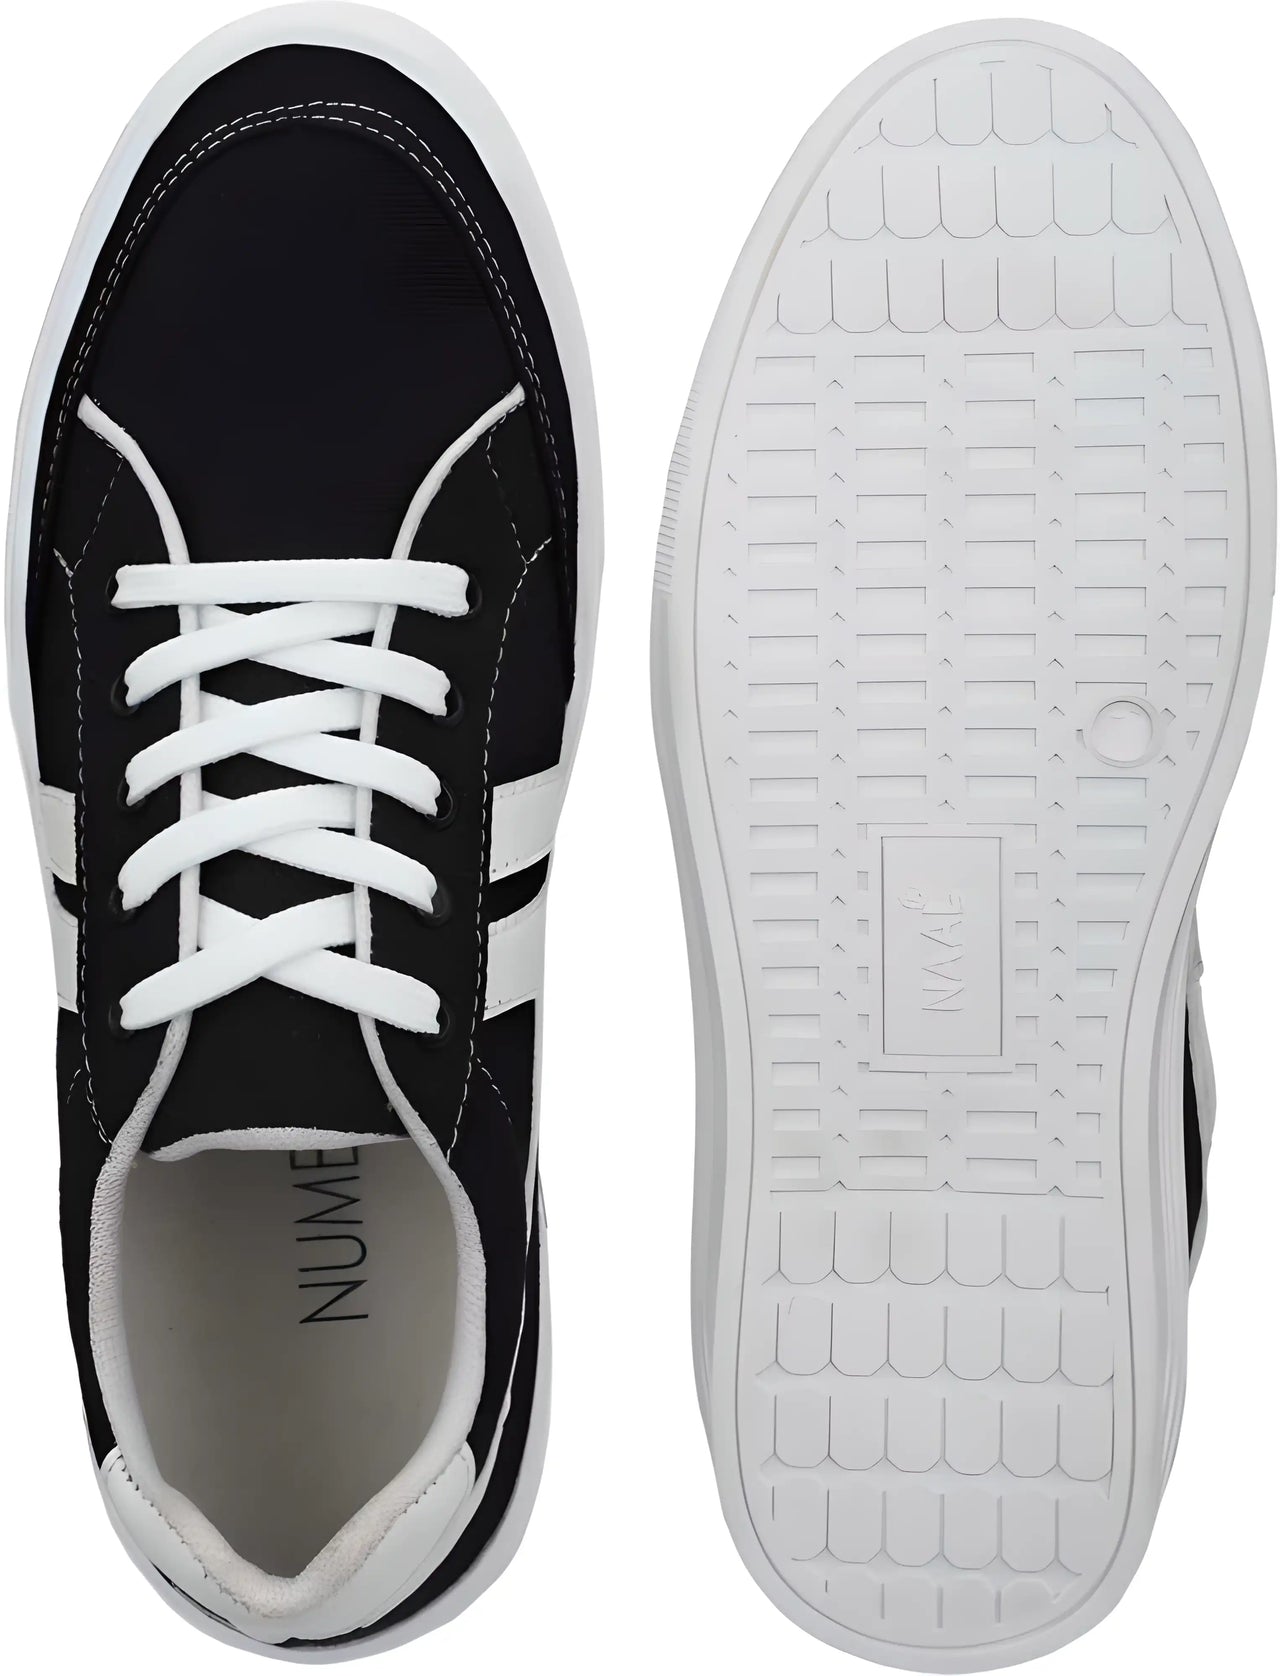 Castoes Casual Sneakers For Men